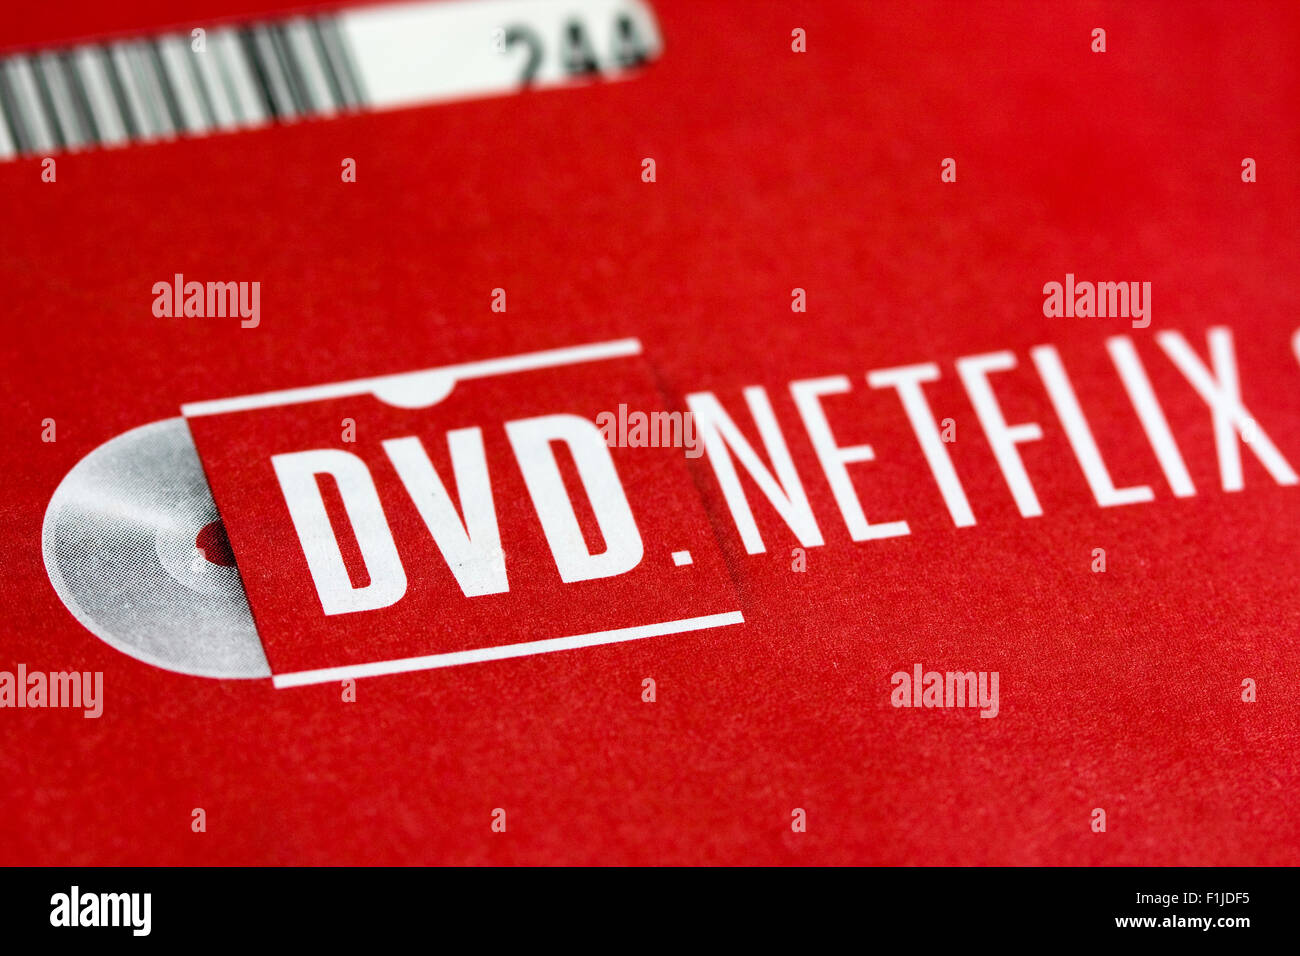 NETFLIX logo on red envelope used for returning a rented DVD by mail with sleeve barcode visible at upper left Stock Photo